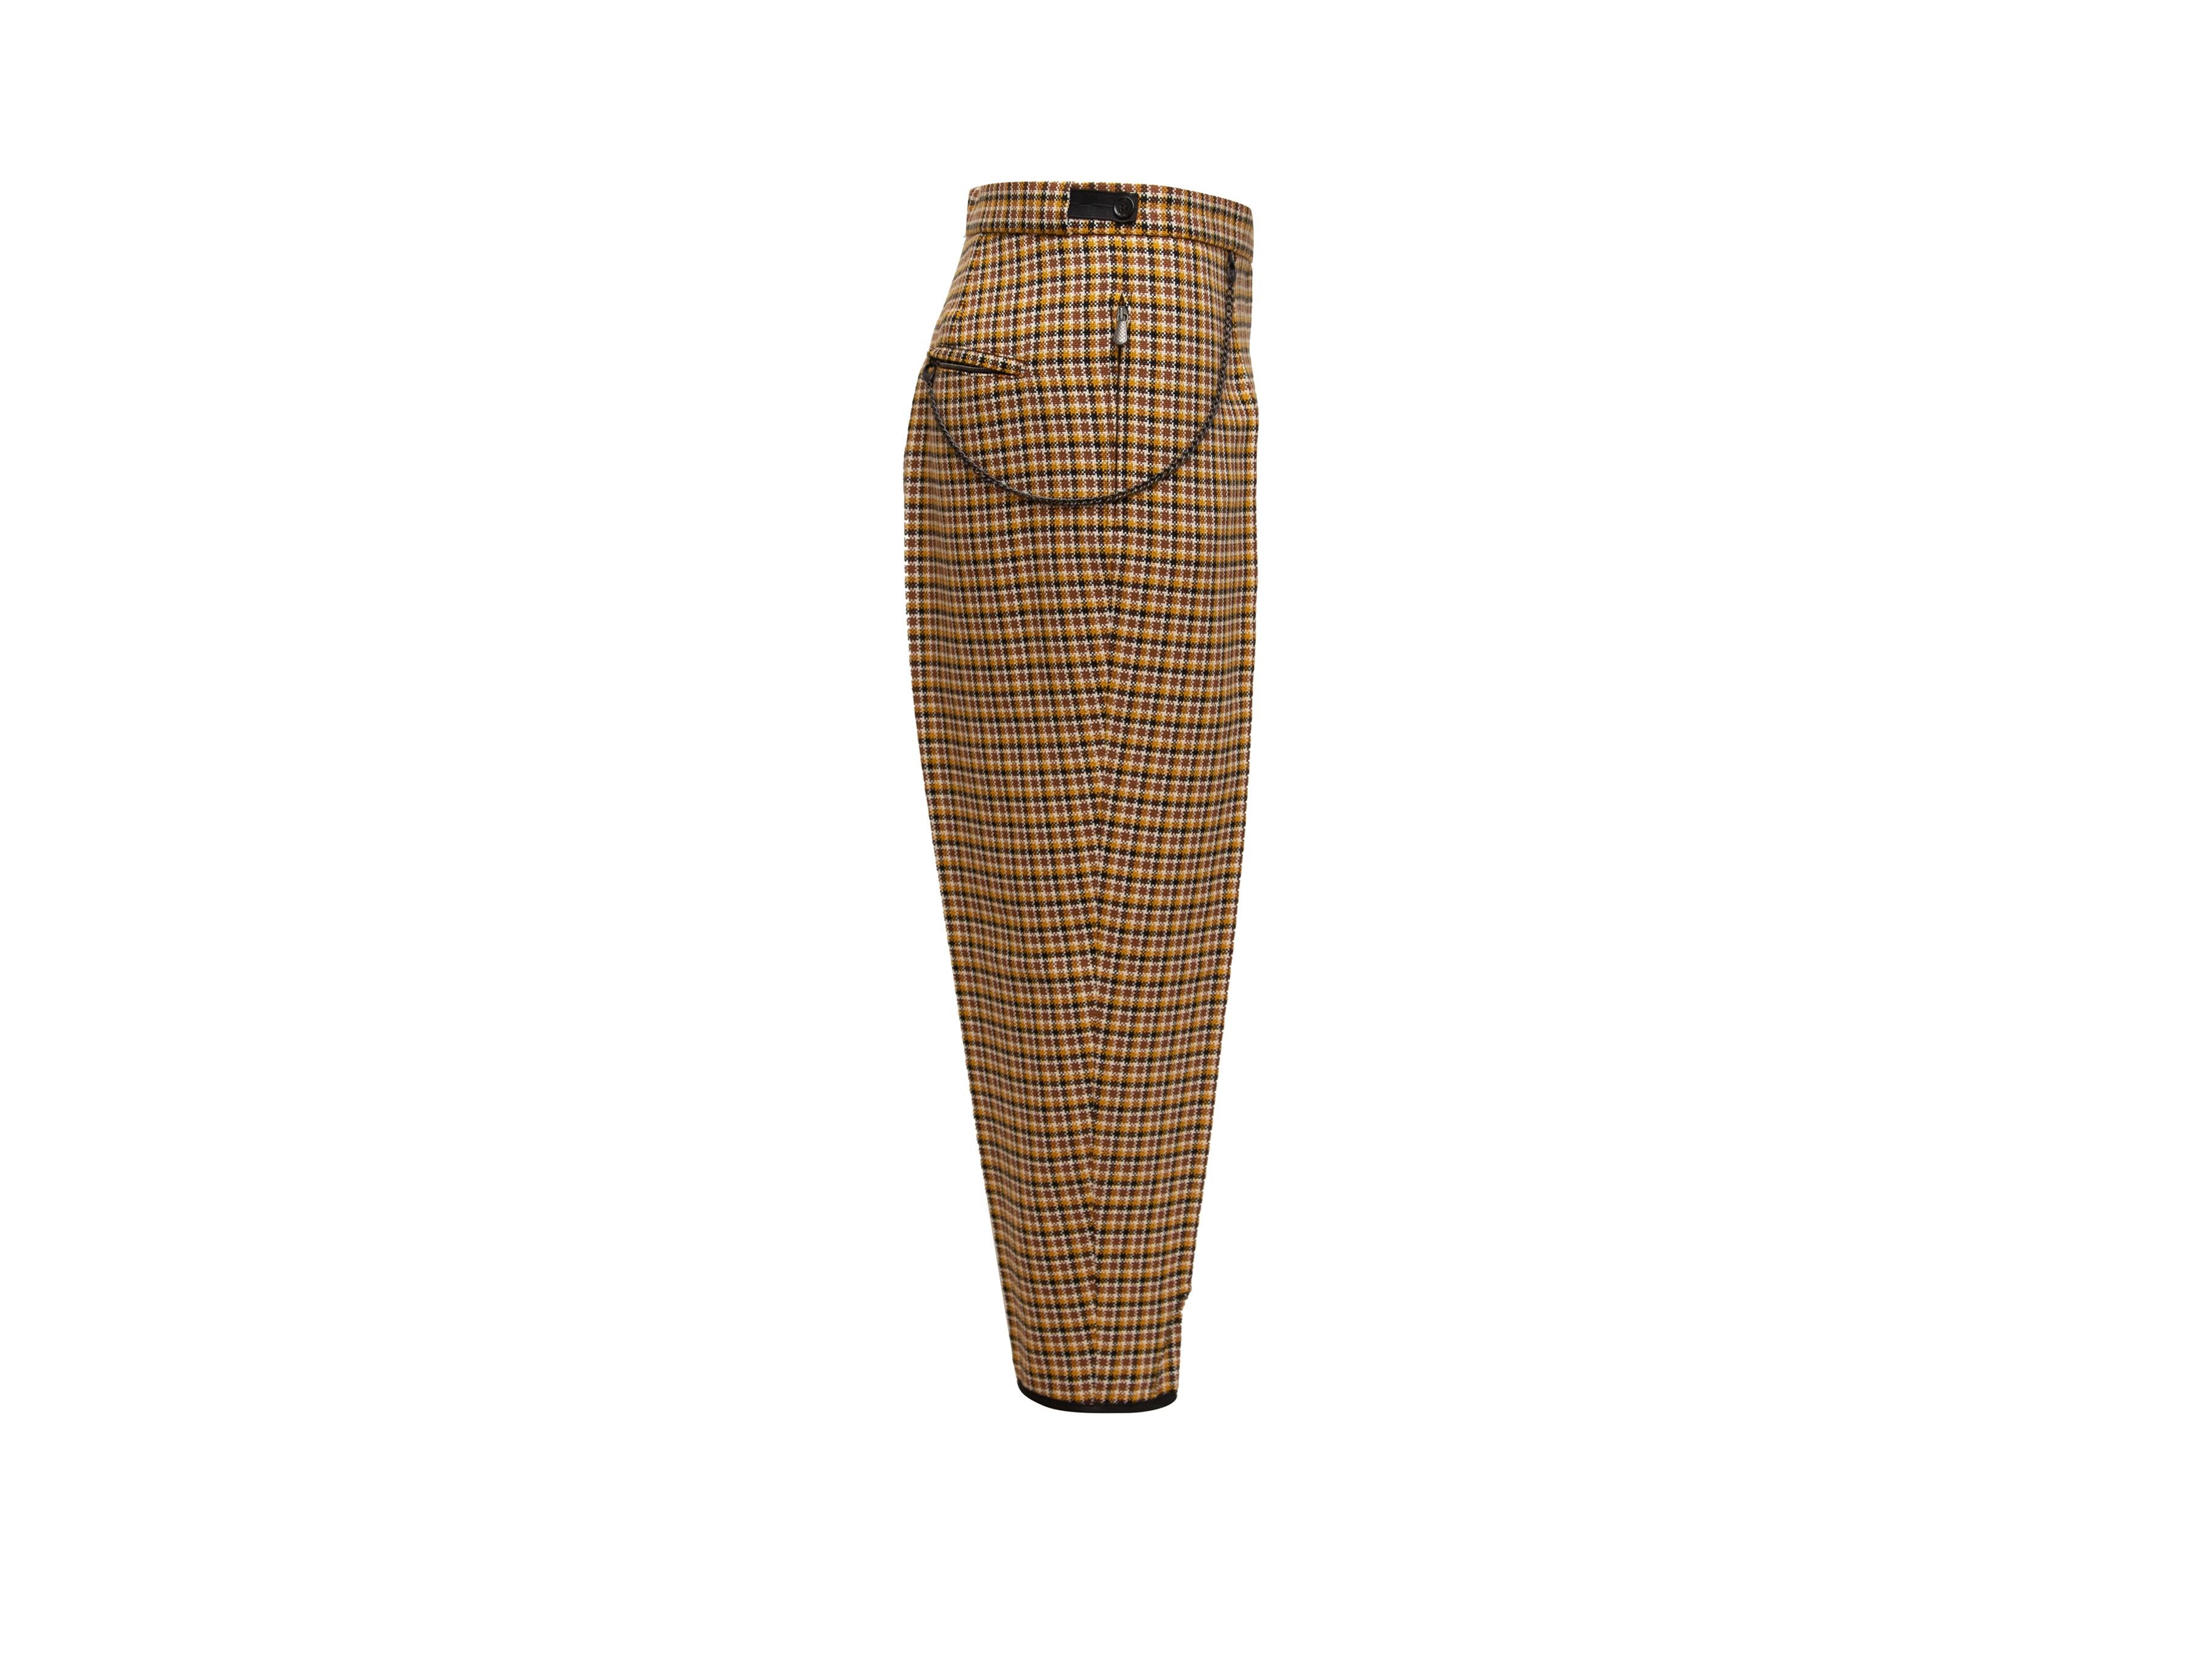 Product details: Mustard and multicolor wool plaid trousers by Bottega Veneta. Single back pocket. Chain adornments at sides. Designer size 46. 37